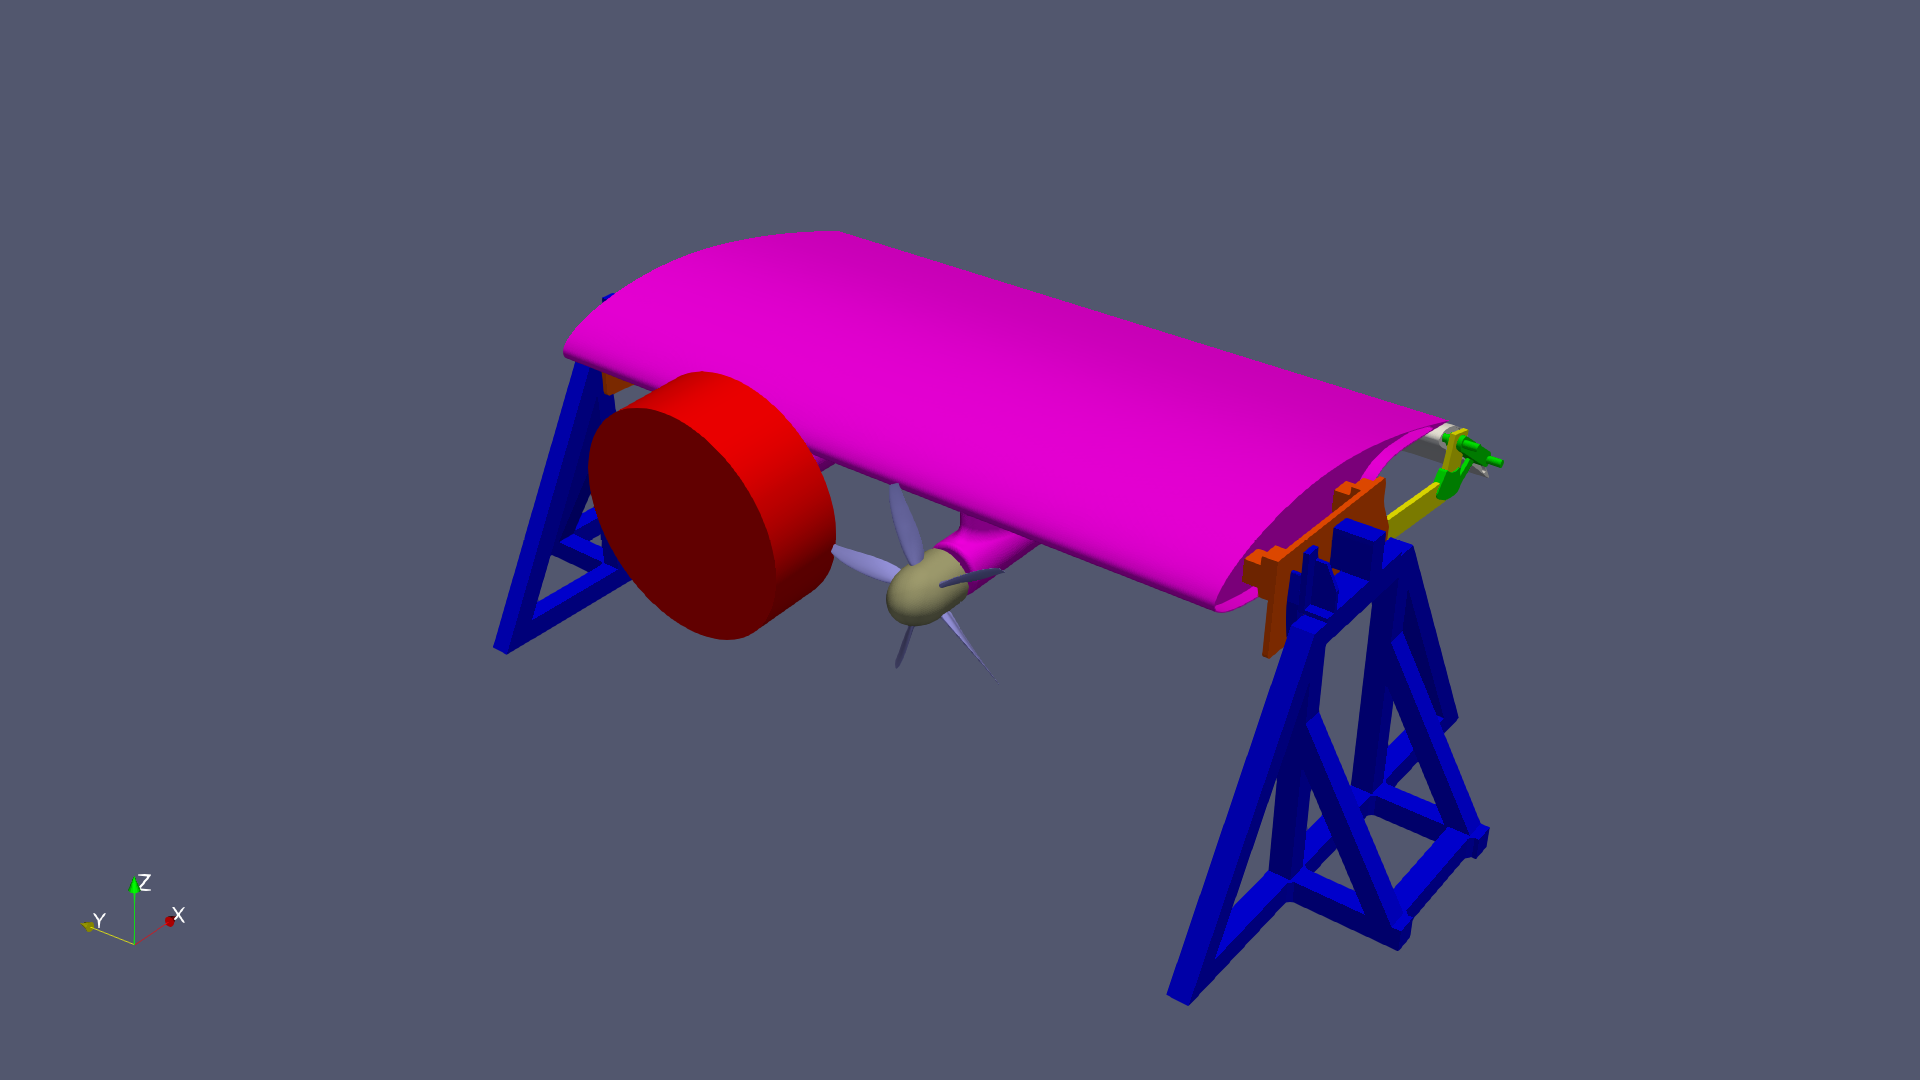 CFD model of the blown wing test article